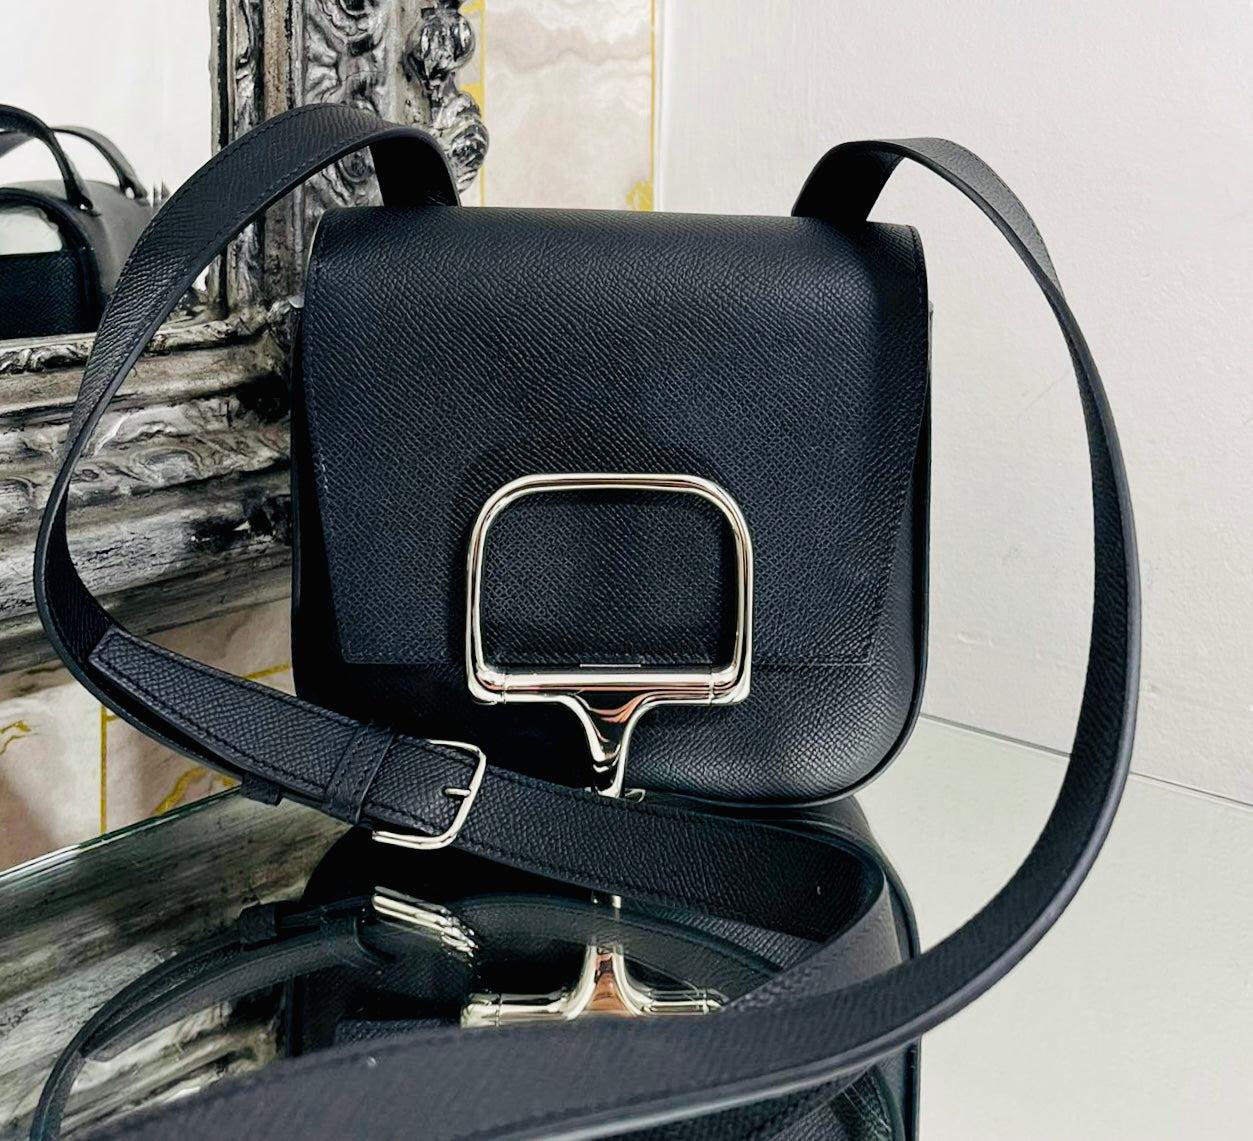 Brand New - Hermes Della Cavalleria Mini Epsom Leather Bag

Black, structured crossbody bag detailed with palladium plated clasp in the shape of half a Verdun horse bit, hugging the curve of the leather.

Featuring front flap, wide, adjustable